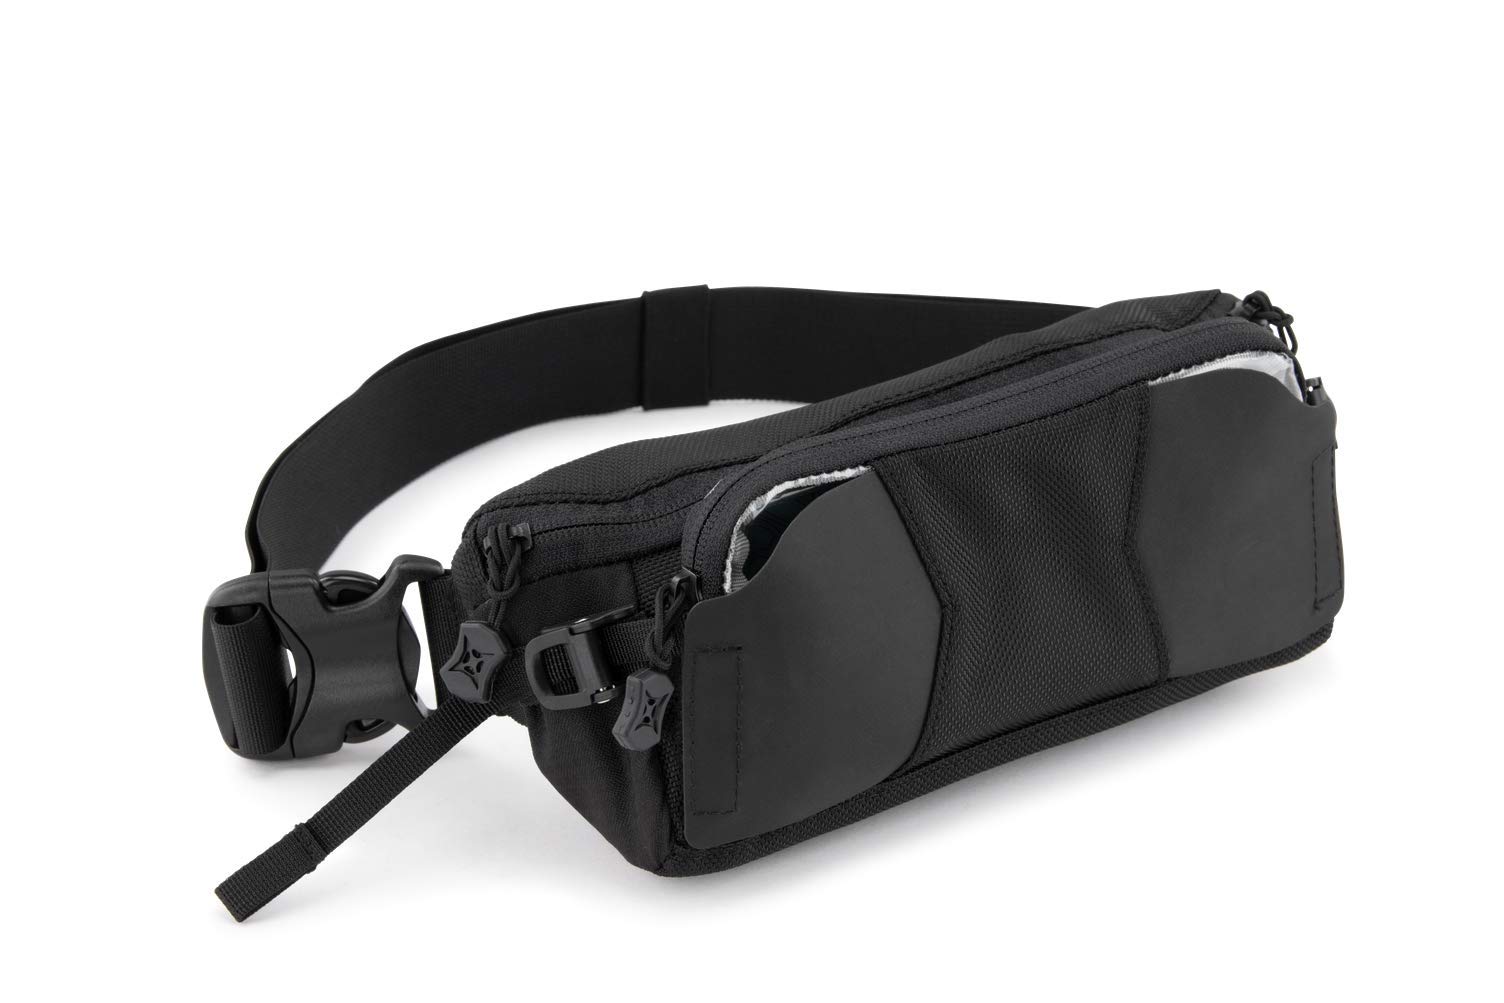 Vertx SOCP Sling Tactical Fanny Pack Waist Utility Hip Pouch Belt Bag with Adjustable Strap, Tactical Work Gear, It's Black